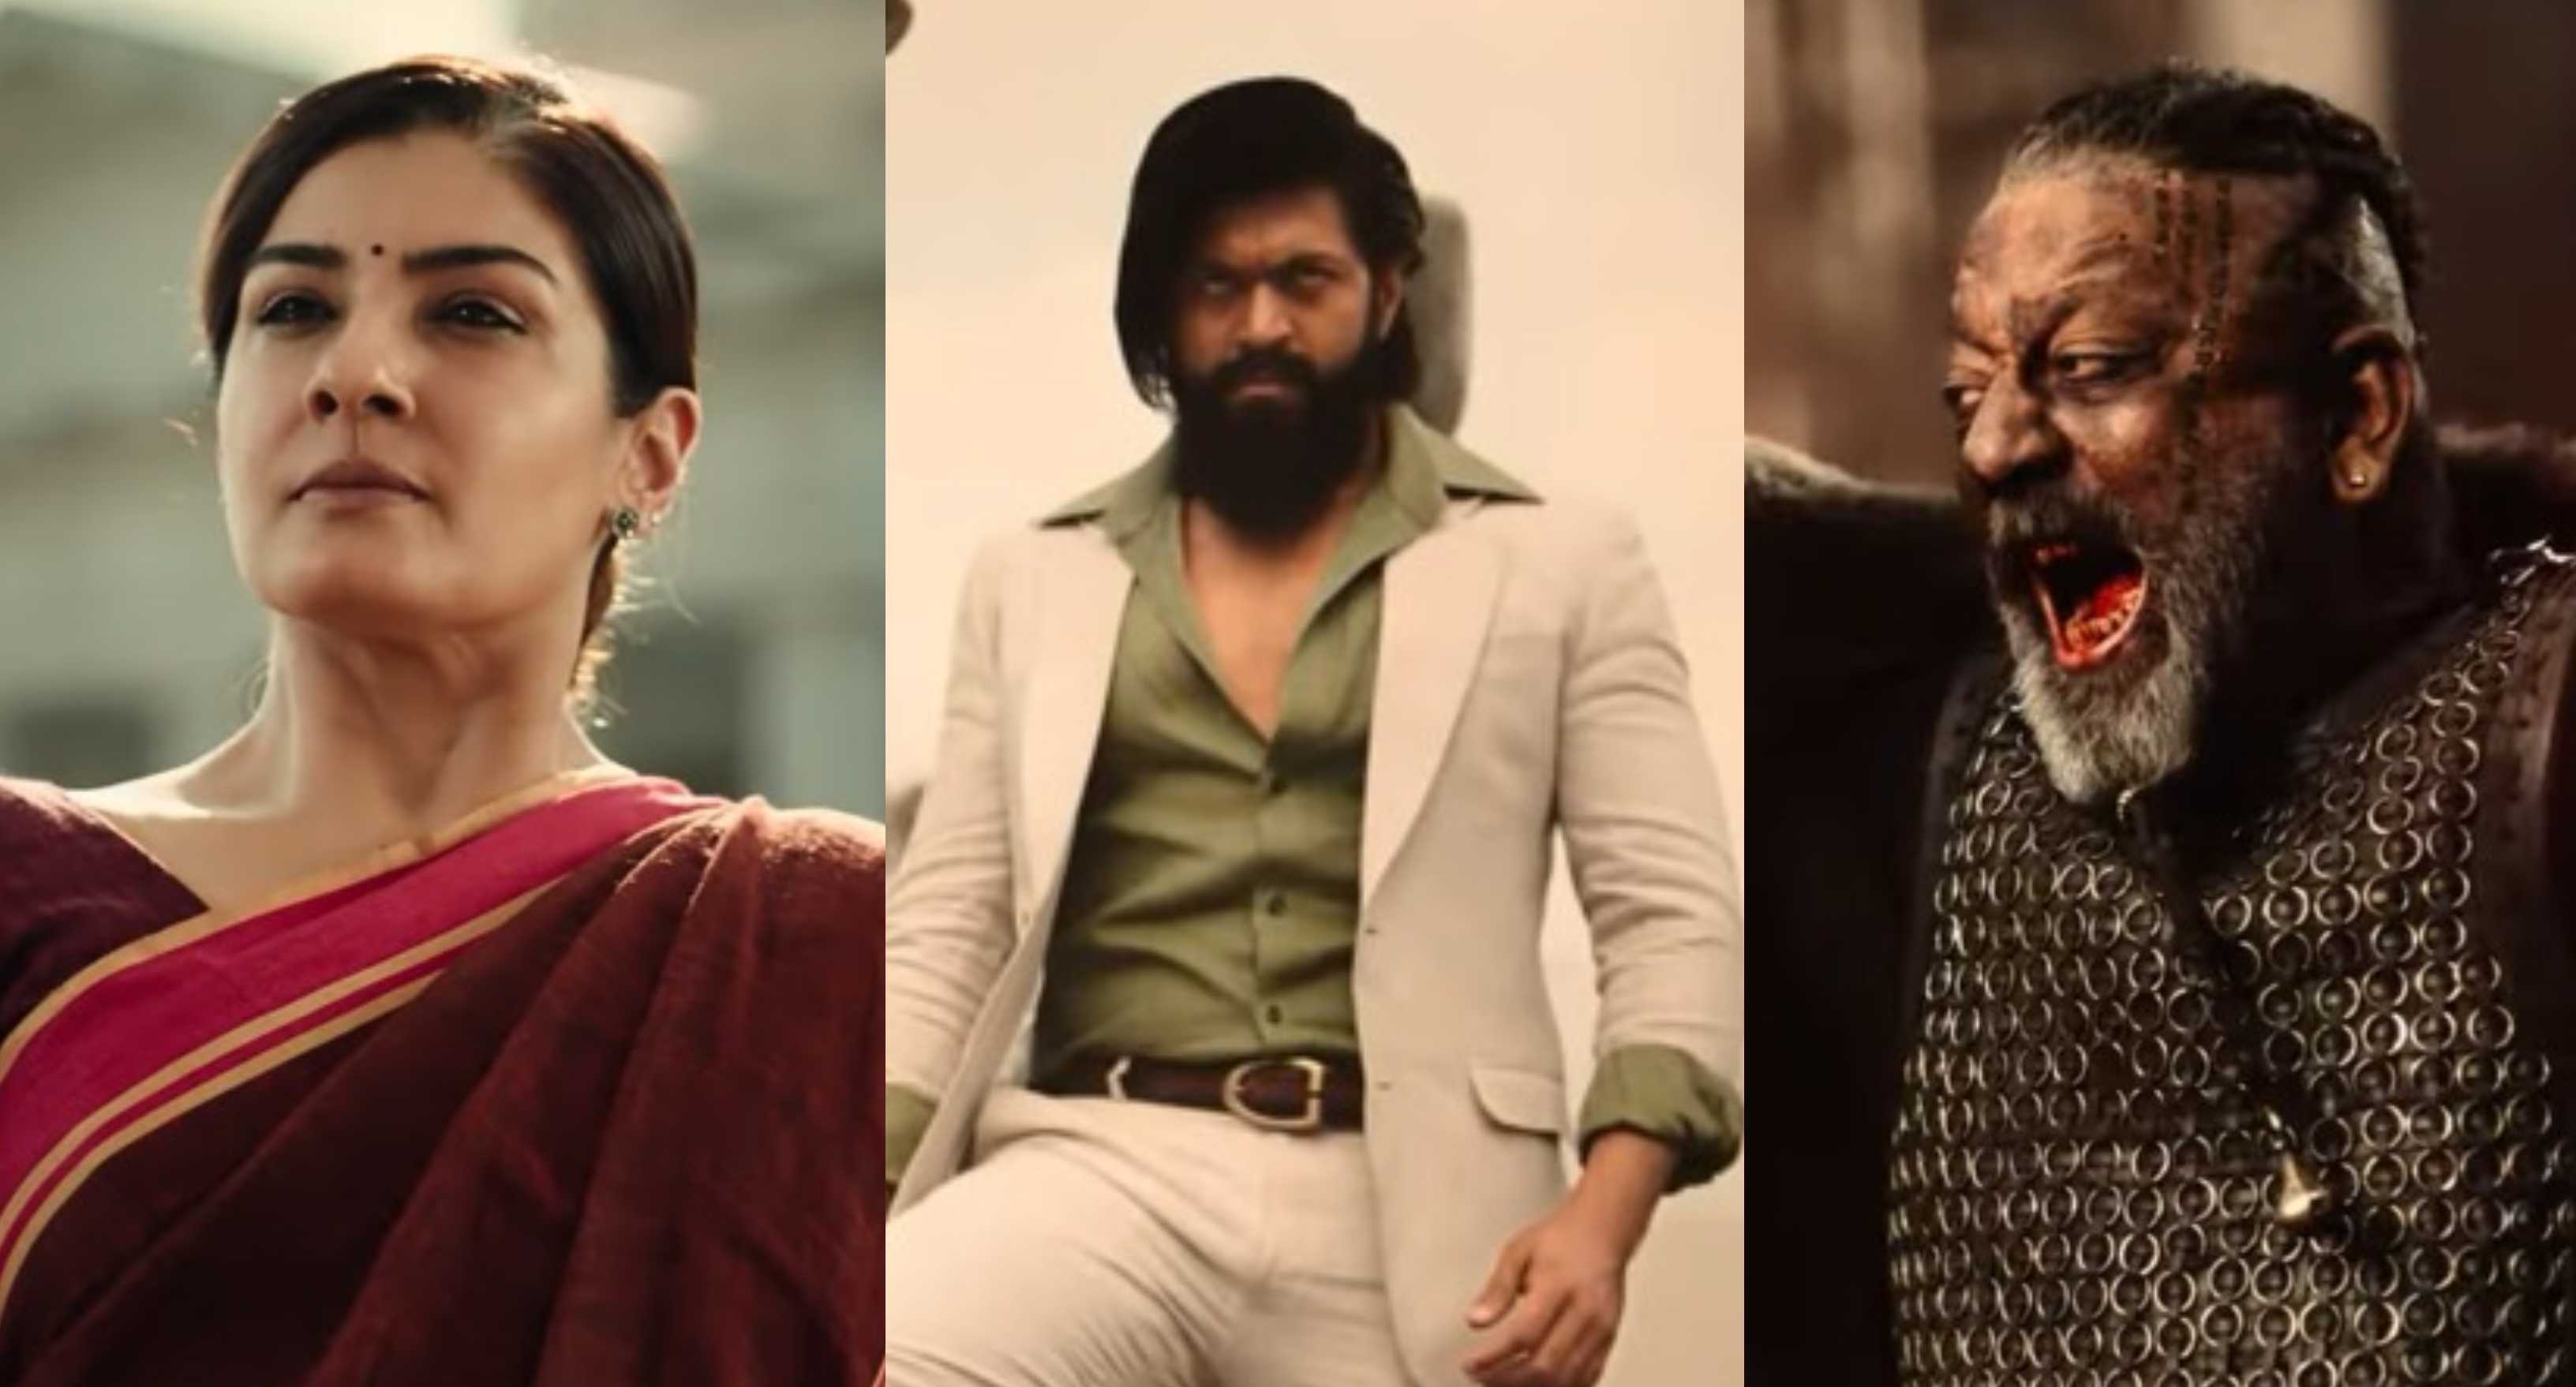 KGF Chapter 2 Trailer: Rocking Star Yash, Sanjay Dutt & Raveena Tandon raise our expectations with their performances